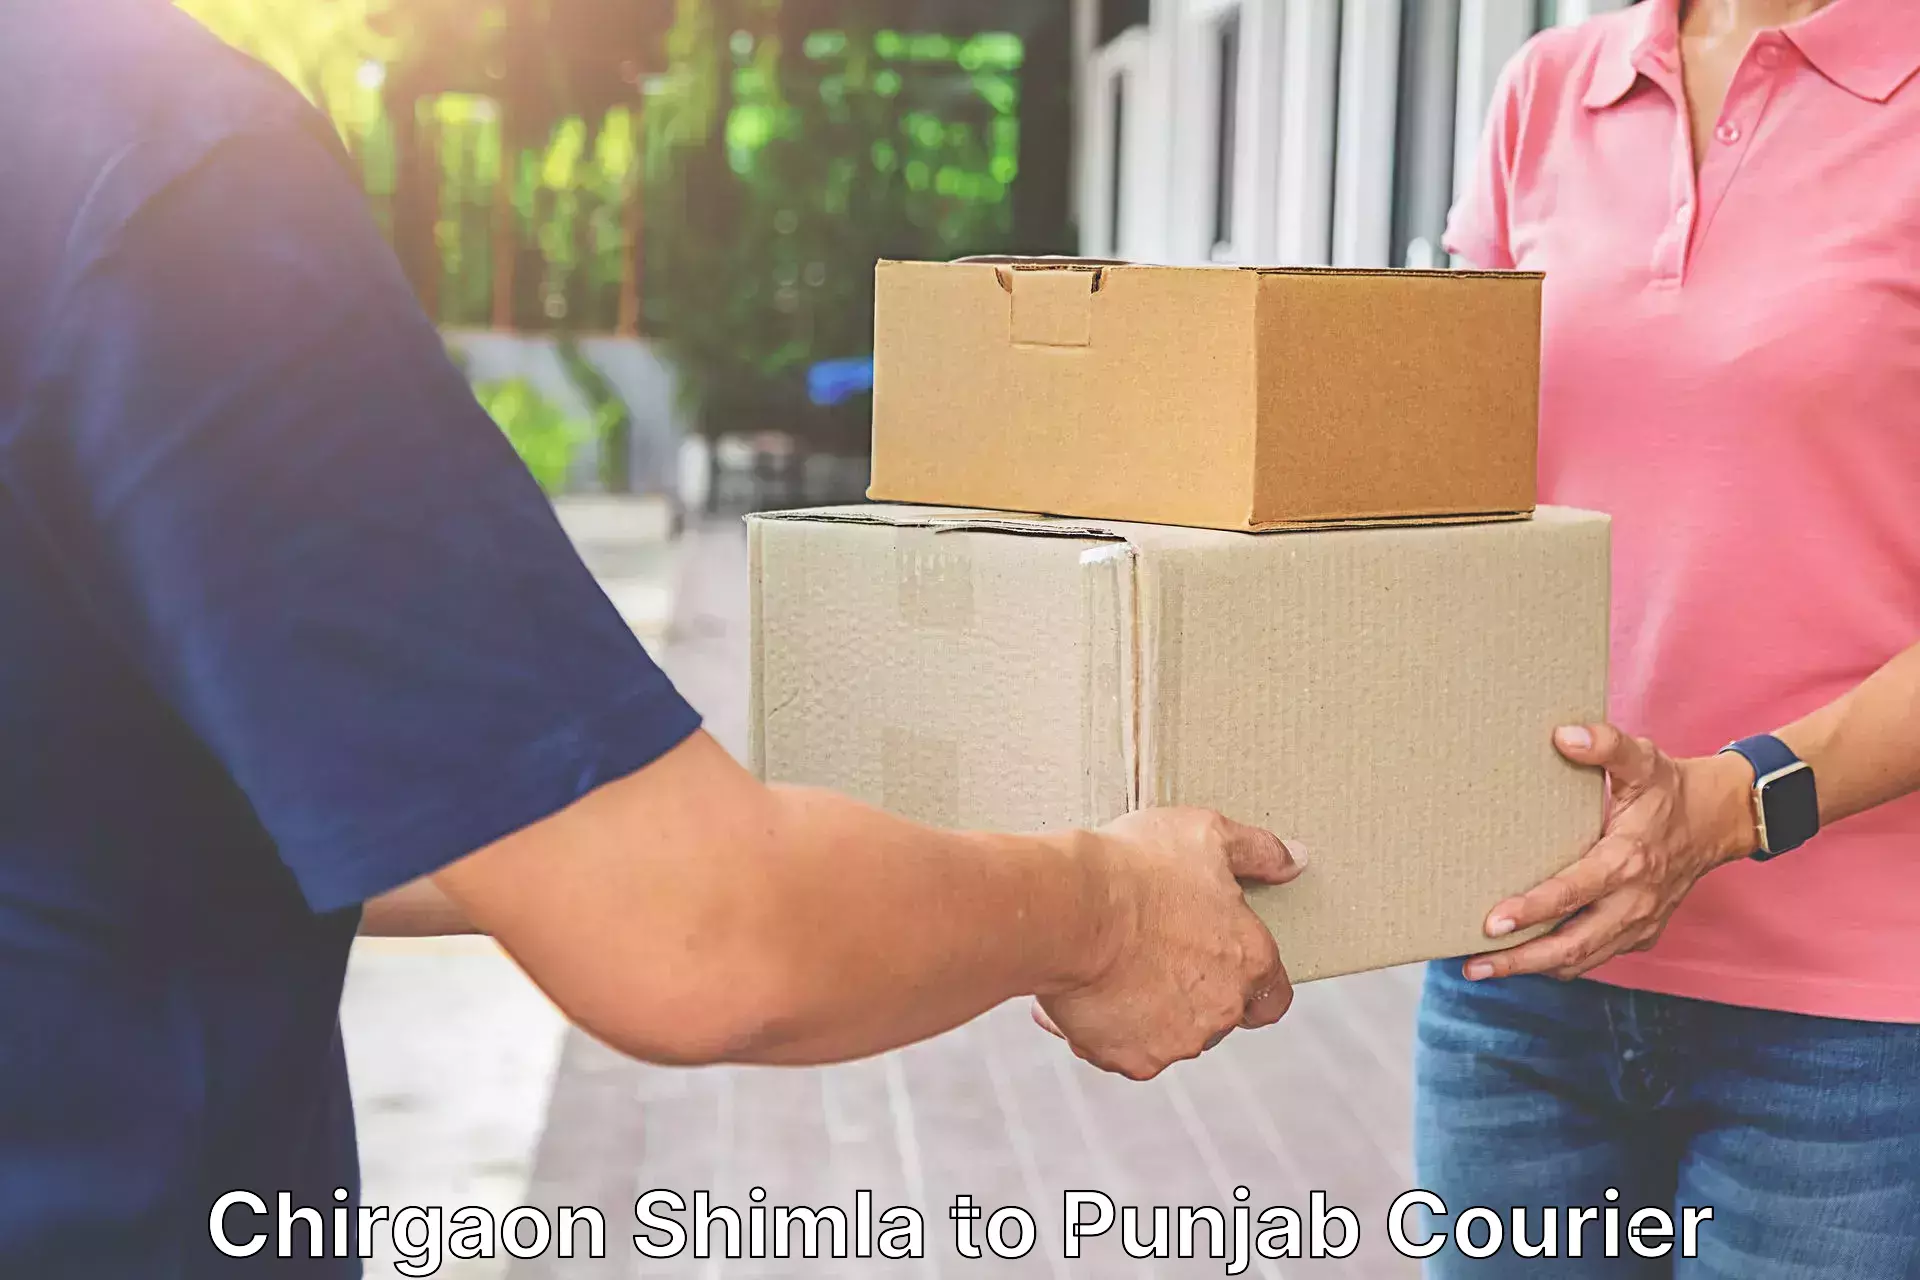 Multi-national courier services Chirgaon Shimla to Punjab